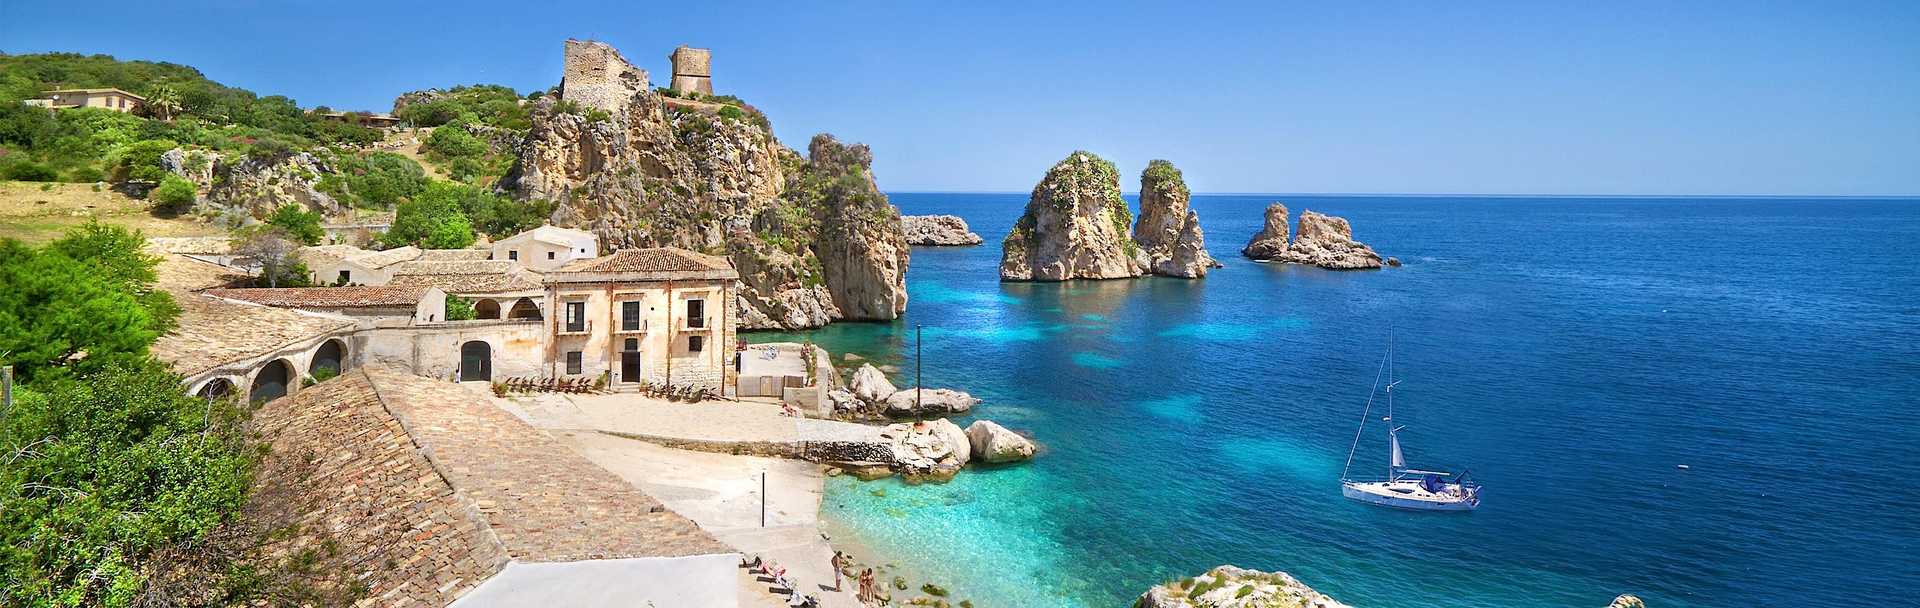 Small beach with clear blue water and rock formations at Tonnara di Scopello in Trapani, Sicily, Italy